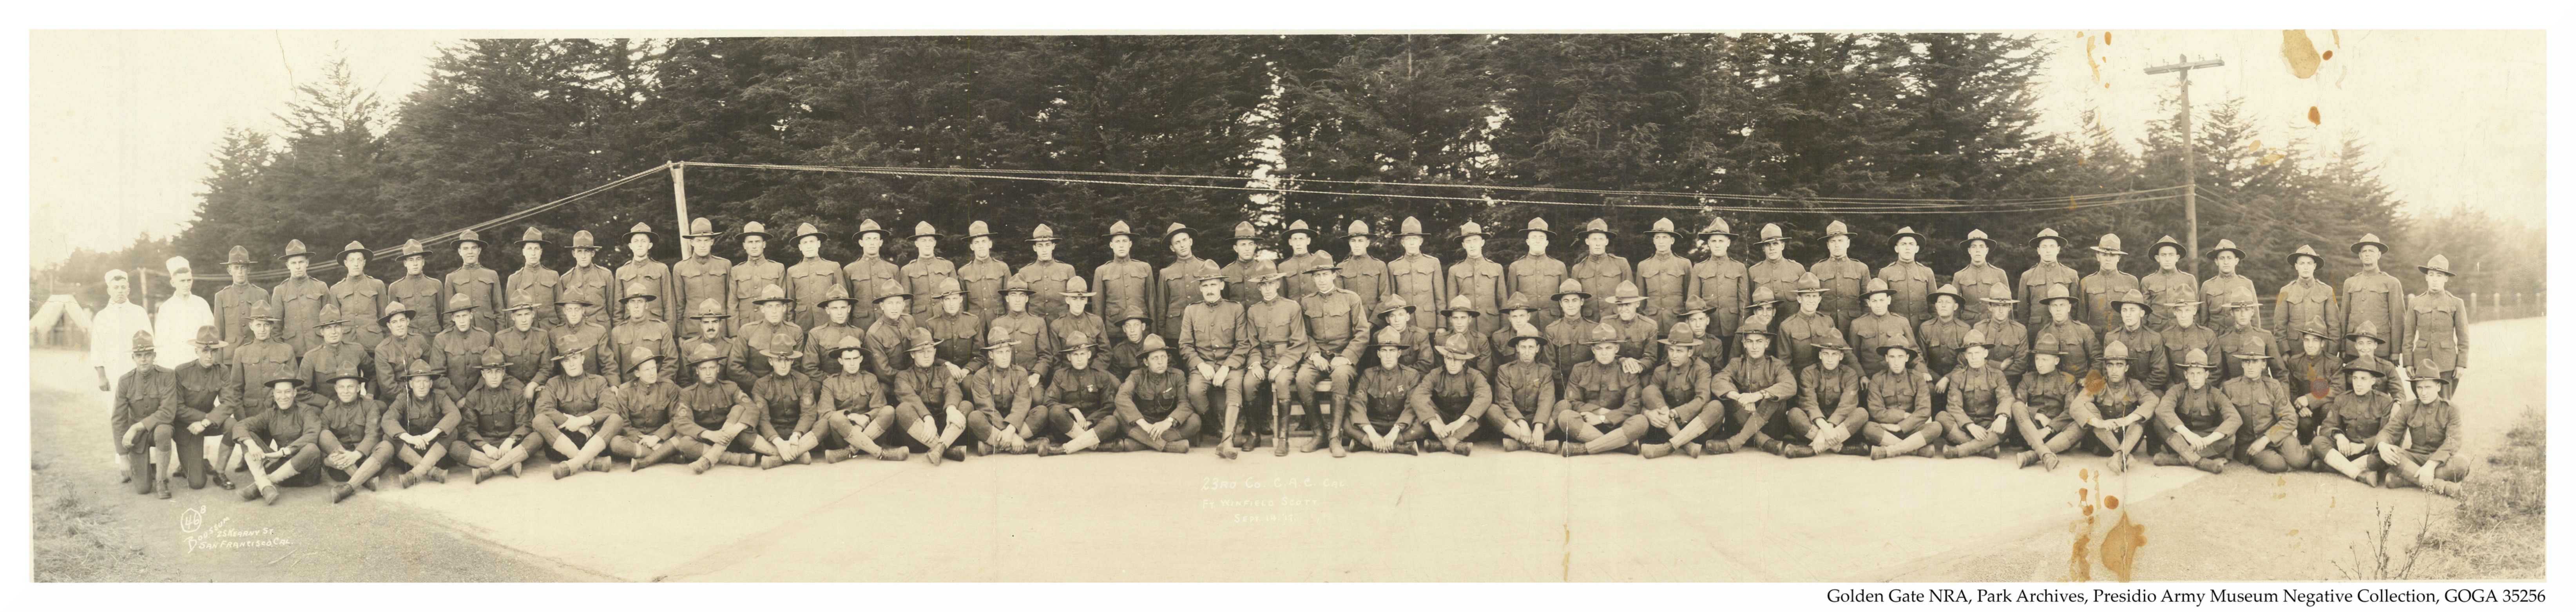 23rd company coast artillery corps taken at Fort Winfield Scott in the presidio of San Francisco in 1917